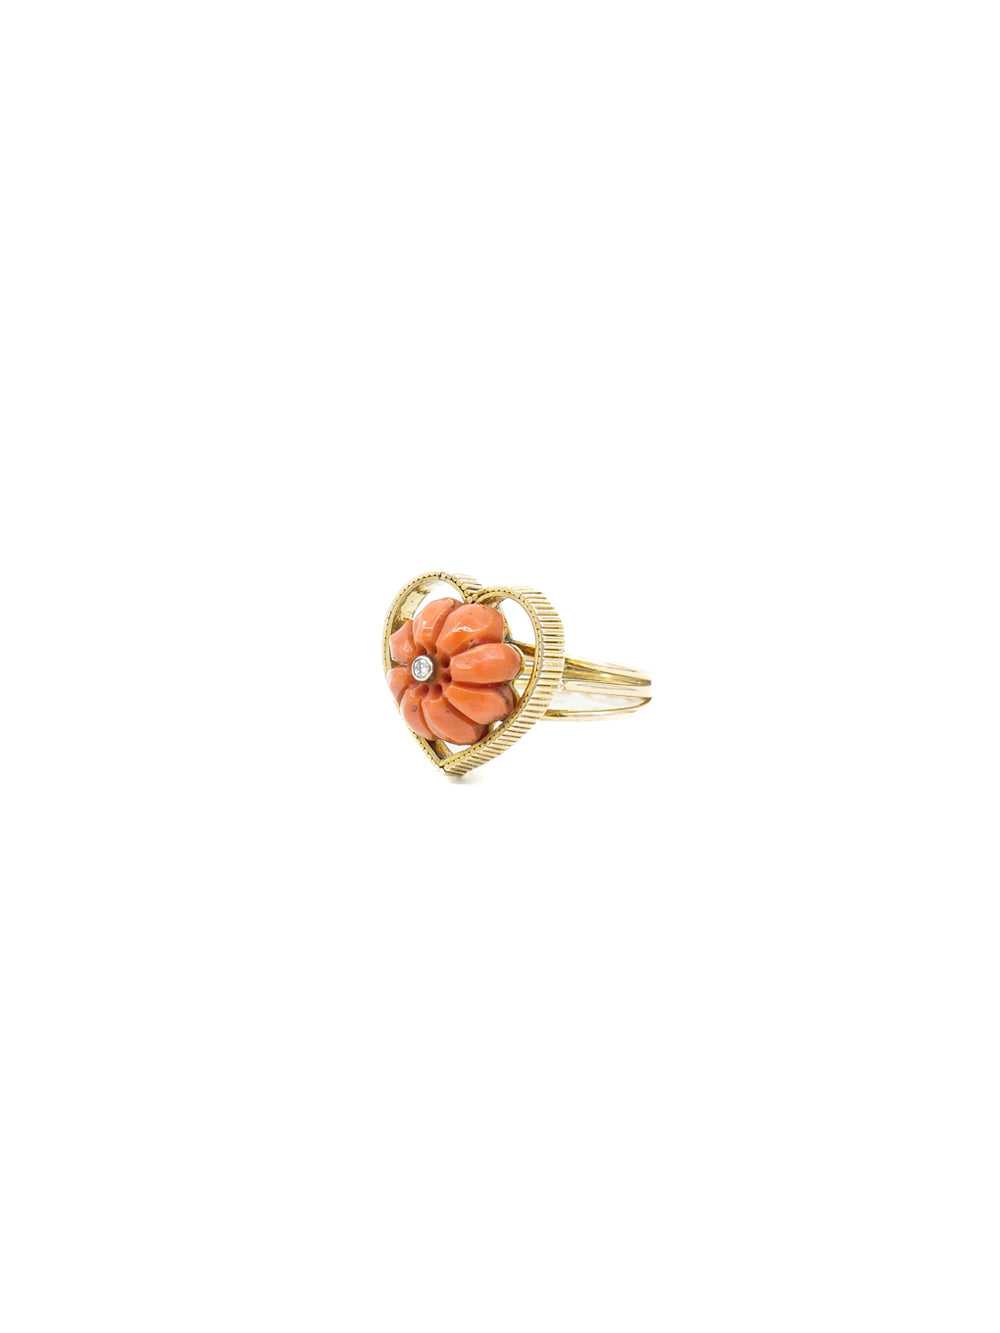 14K Heart Motif Coral and Diamond Ring - image 3